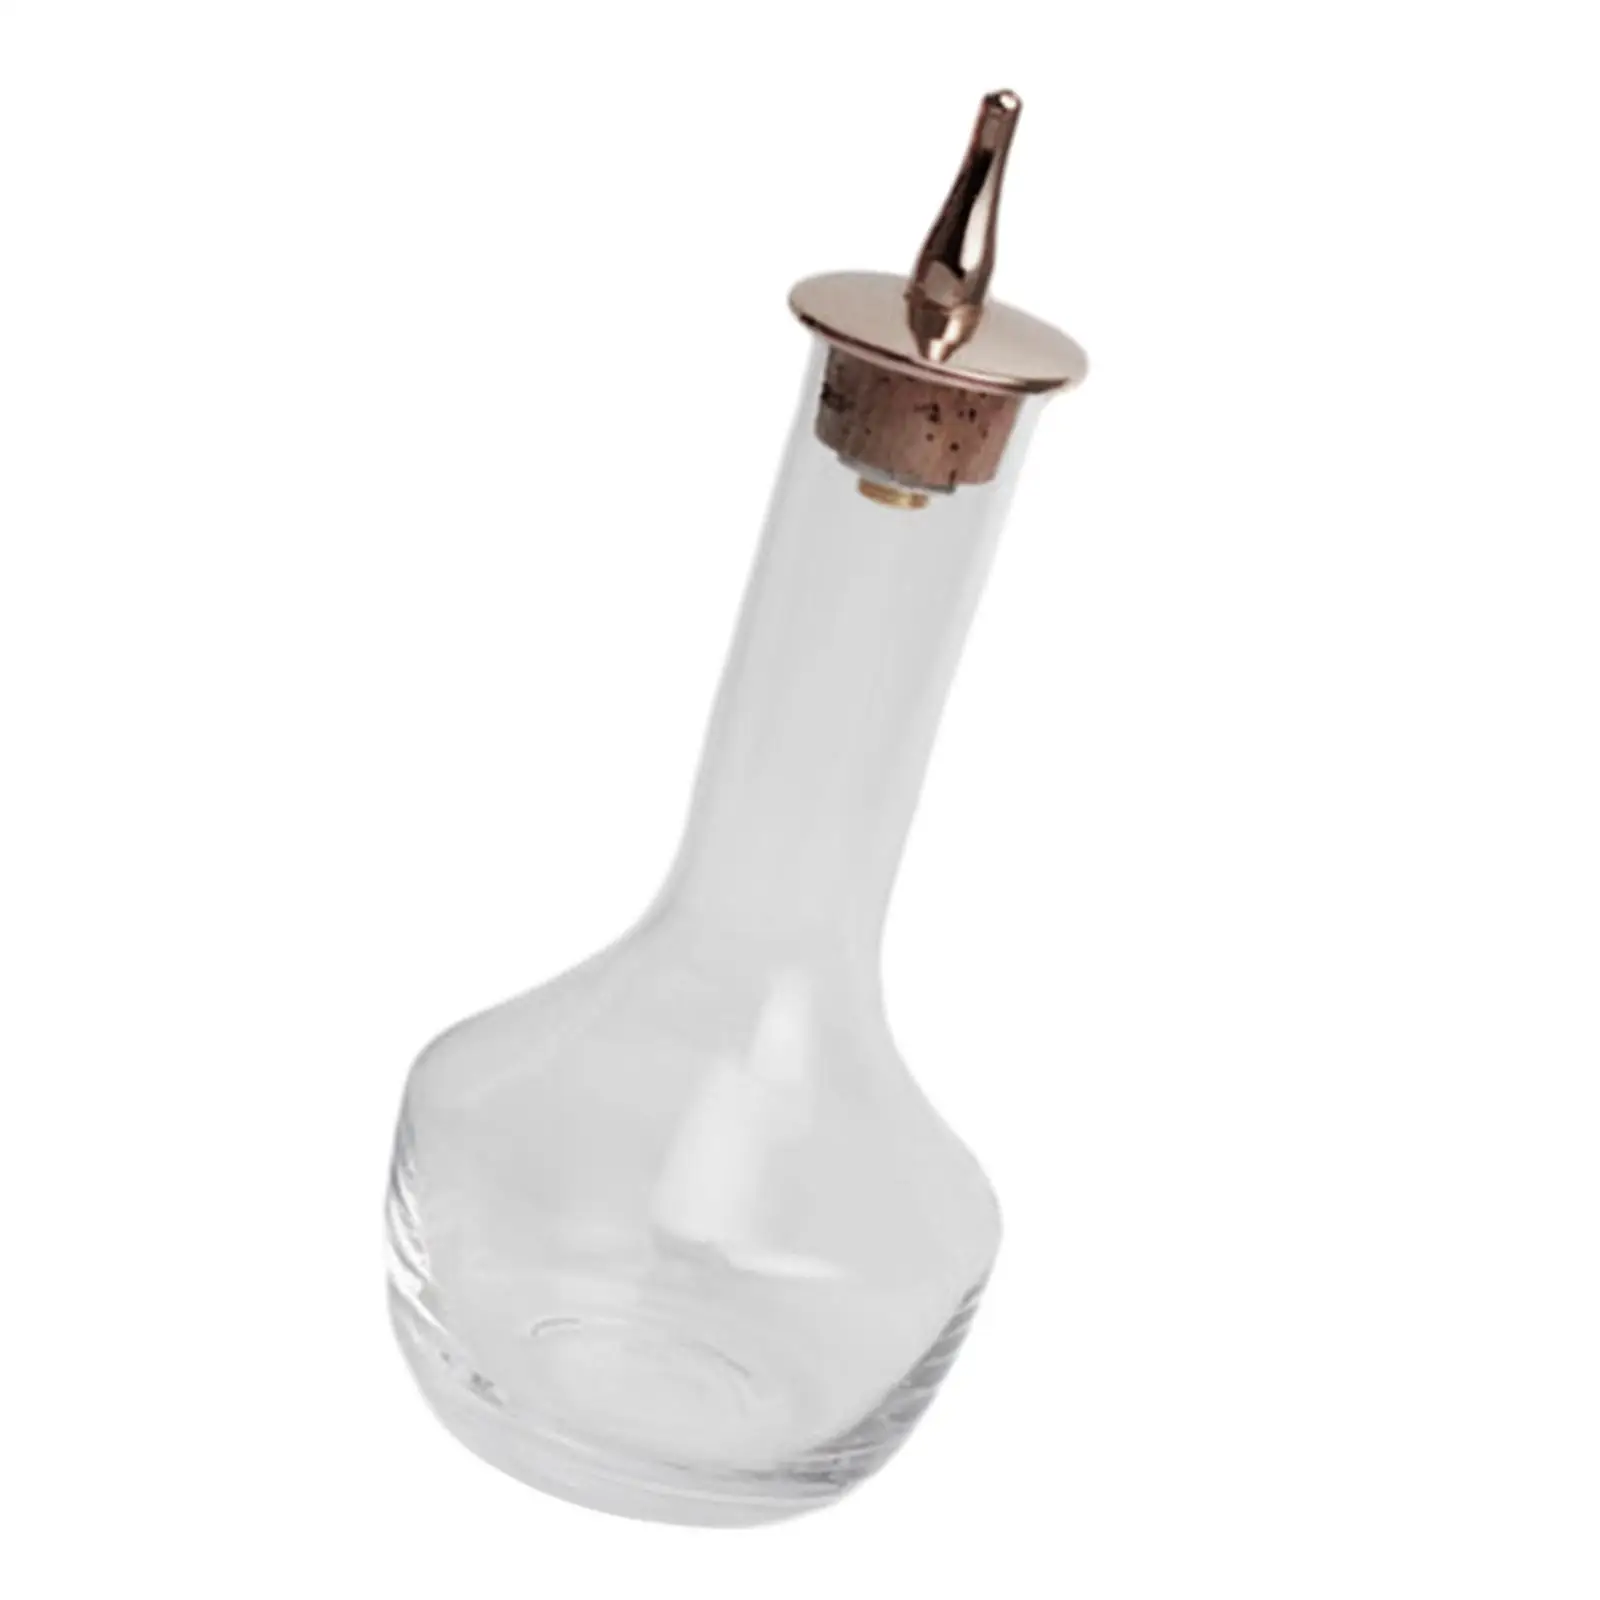 Cocktail Bitter Bottle 50ml Barware Antique with Sturdy Stopper for Making Cocktail Mixing Drinks Dispenser Kitchen Accessories